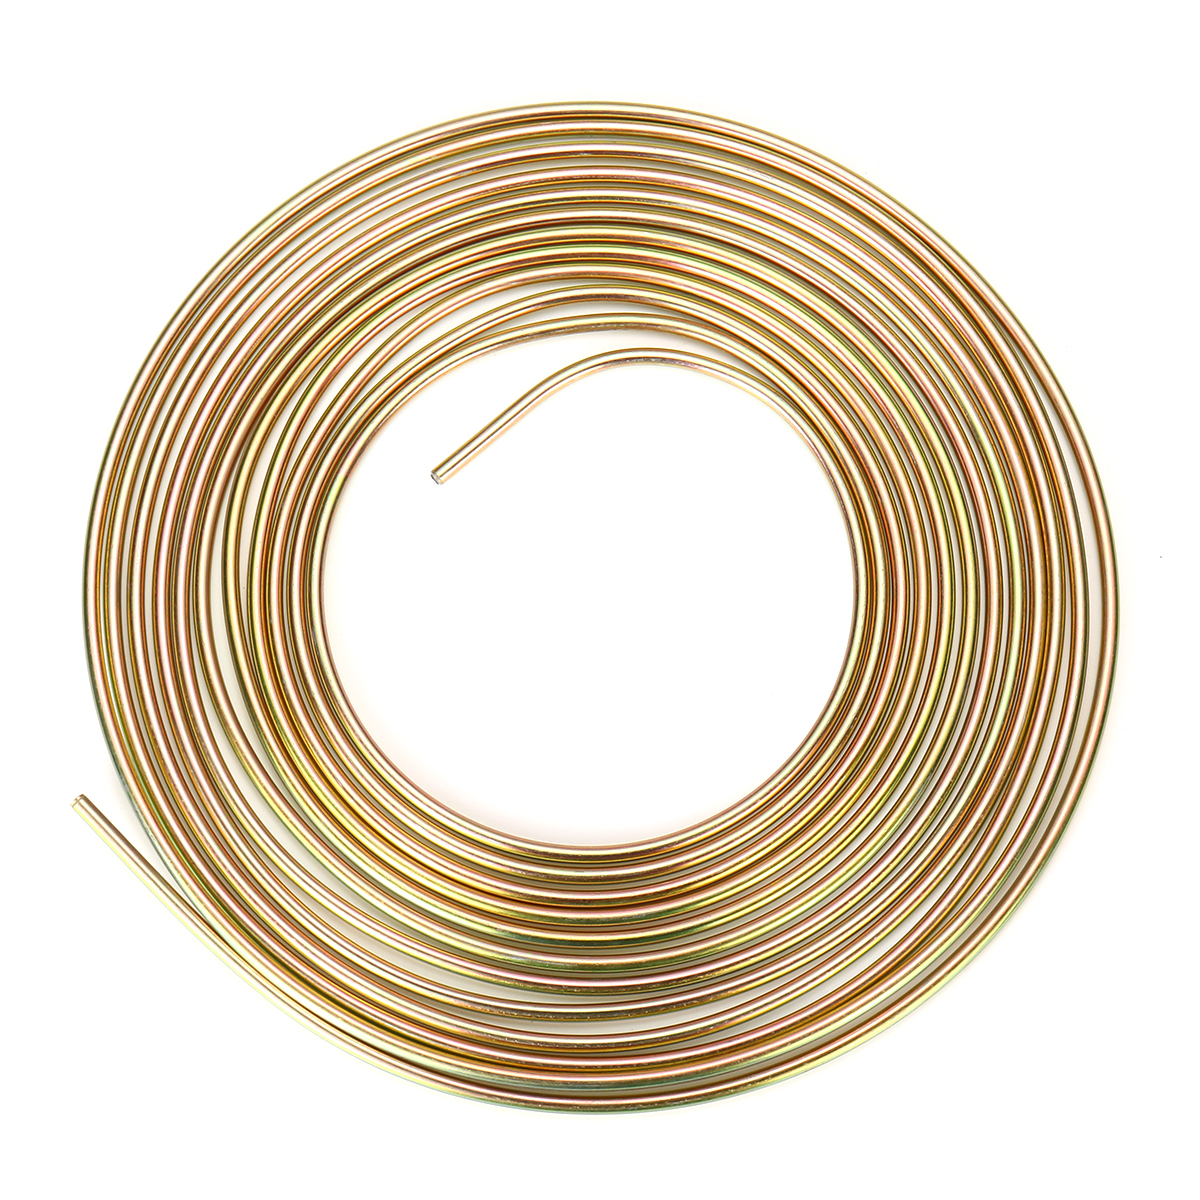 25ft-Roll-of-316-Plated-Brake-Line-Tubing-OD-Copper-Nickel-With-16x-Tube-Nuts-1686126-5